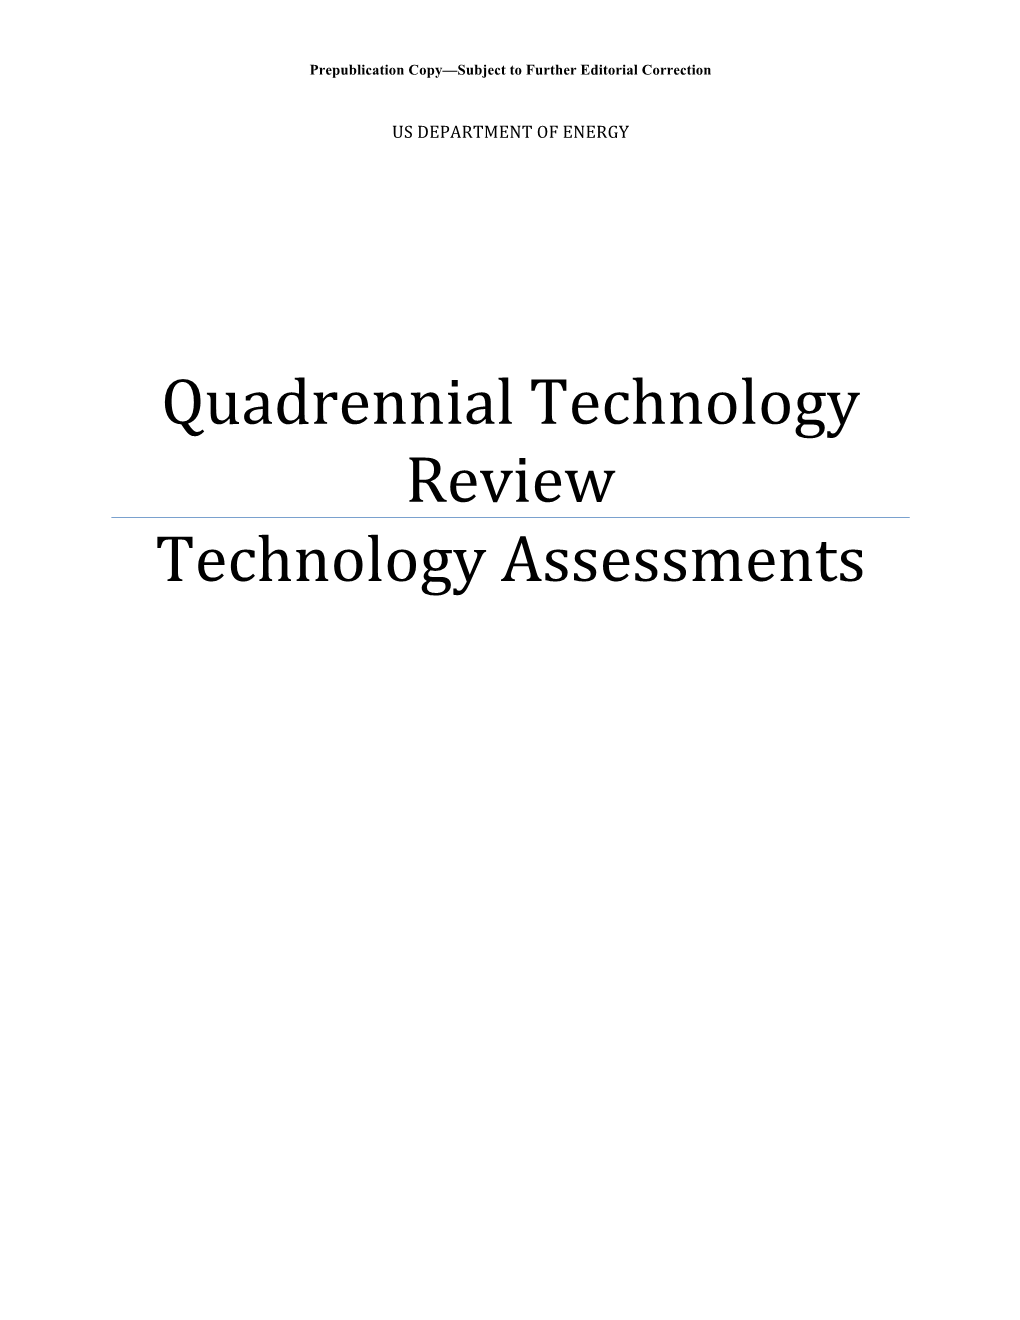 Report on the QTR Tech Assessments